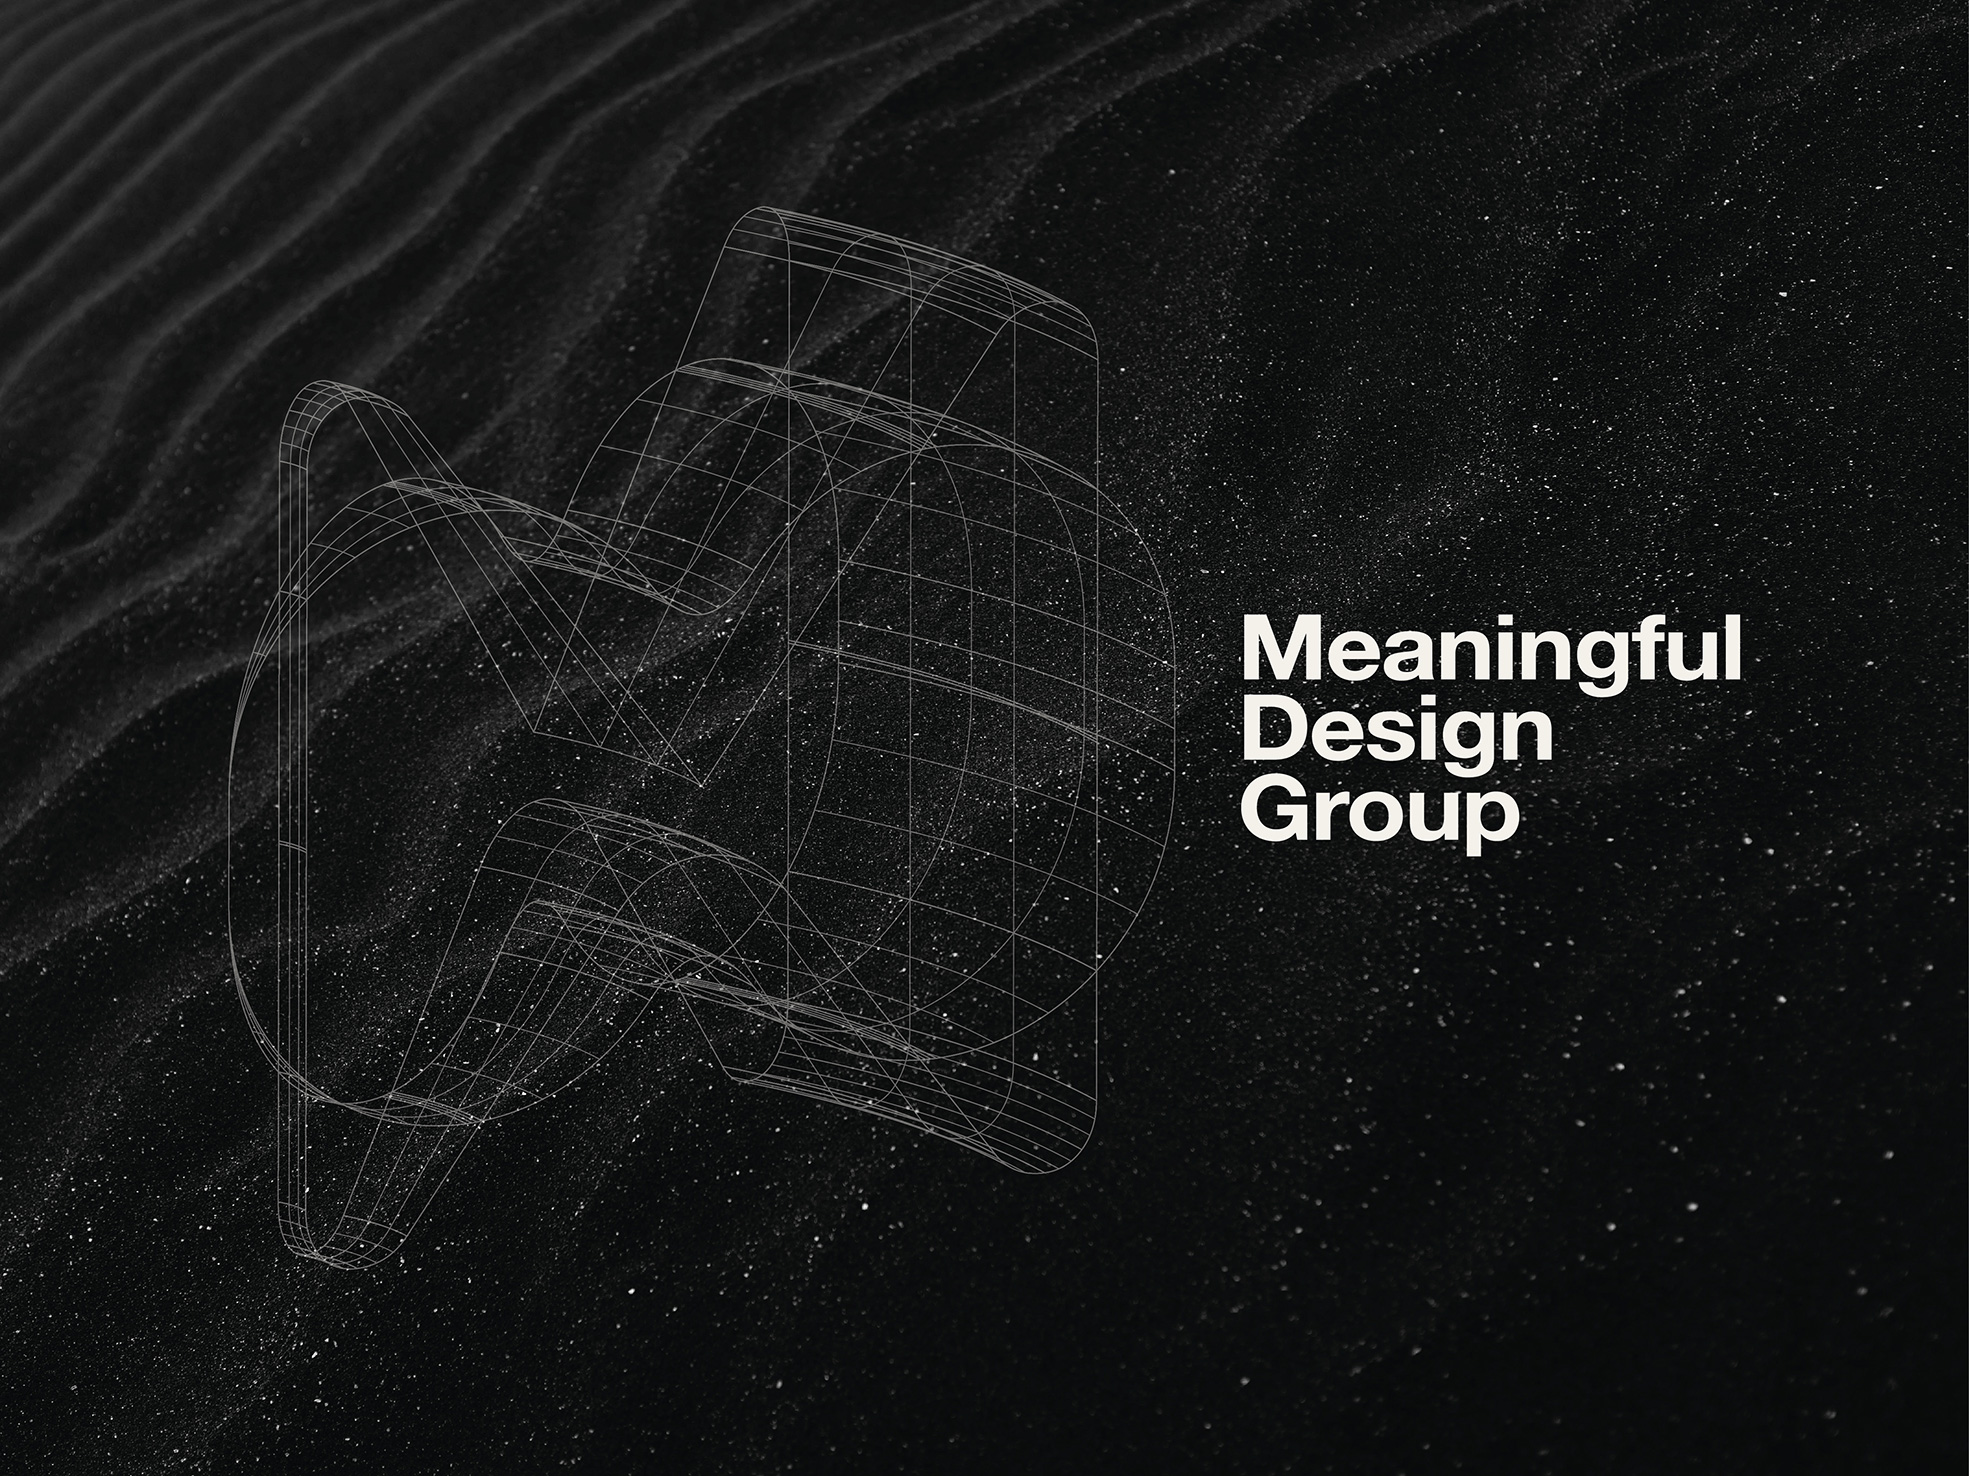 Meaningful Design Group